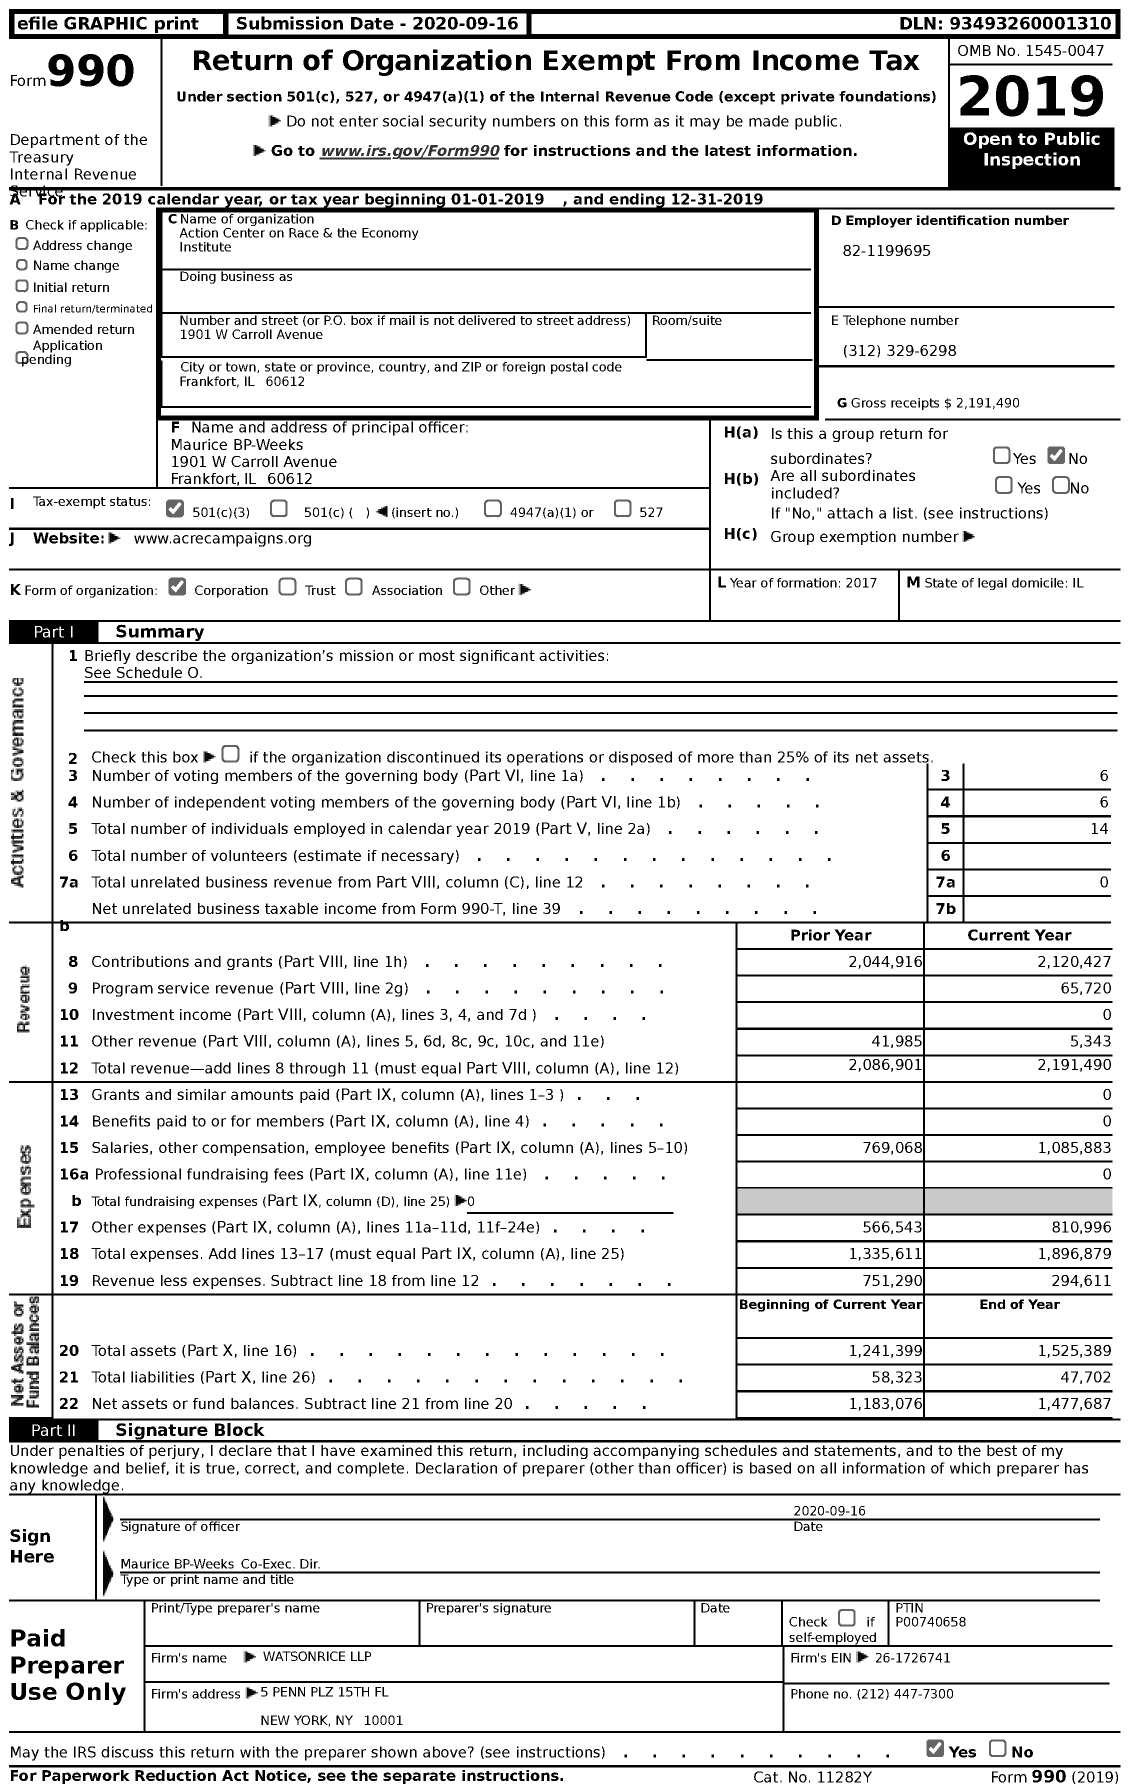 Image of first page of 2019 Form 990 for Action Center on Race & the Economy Institute